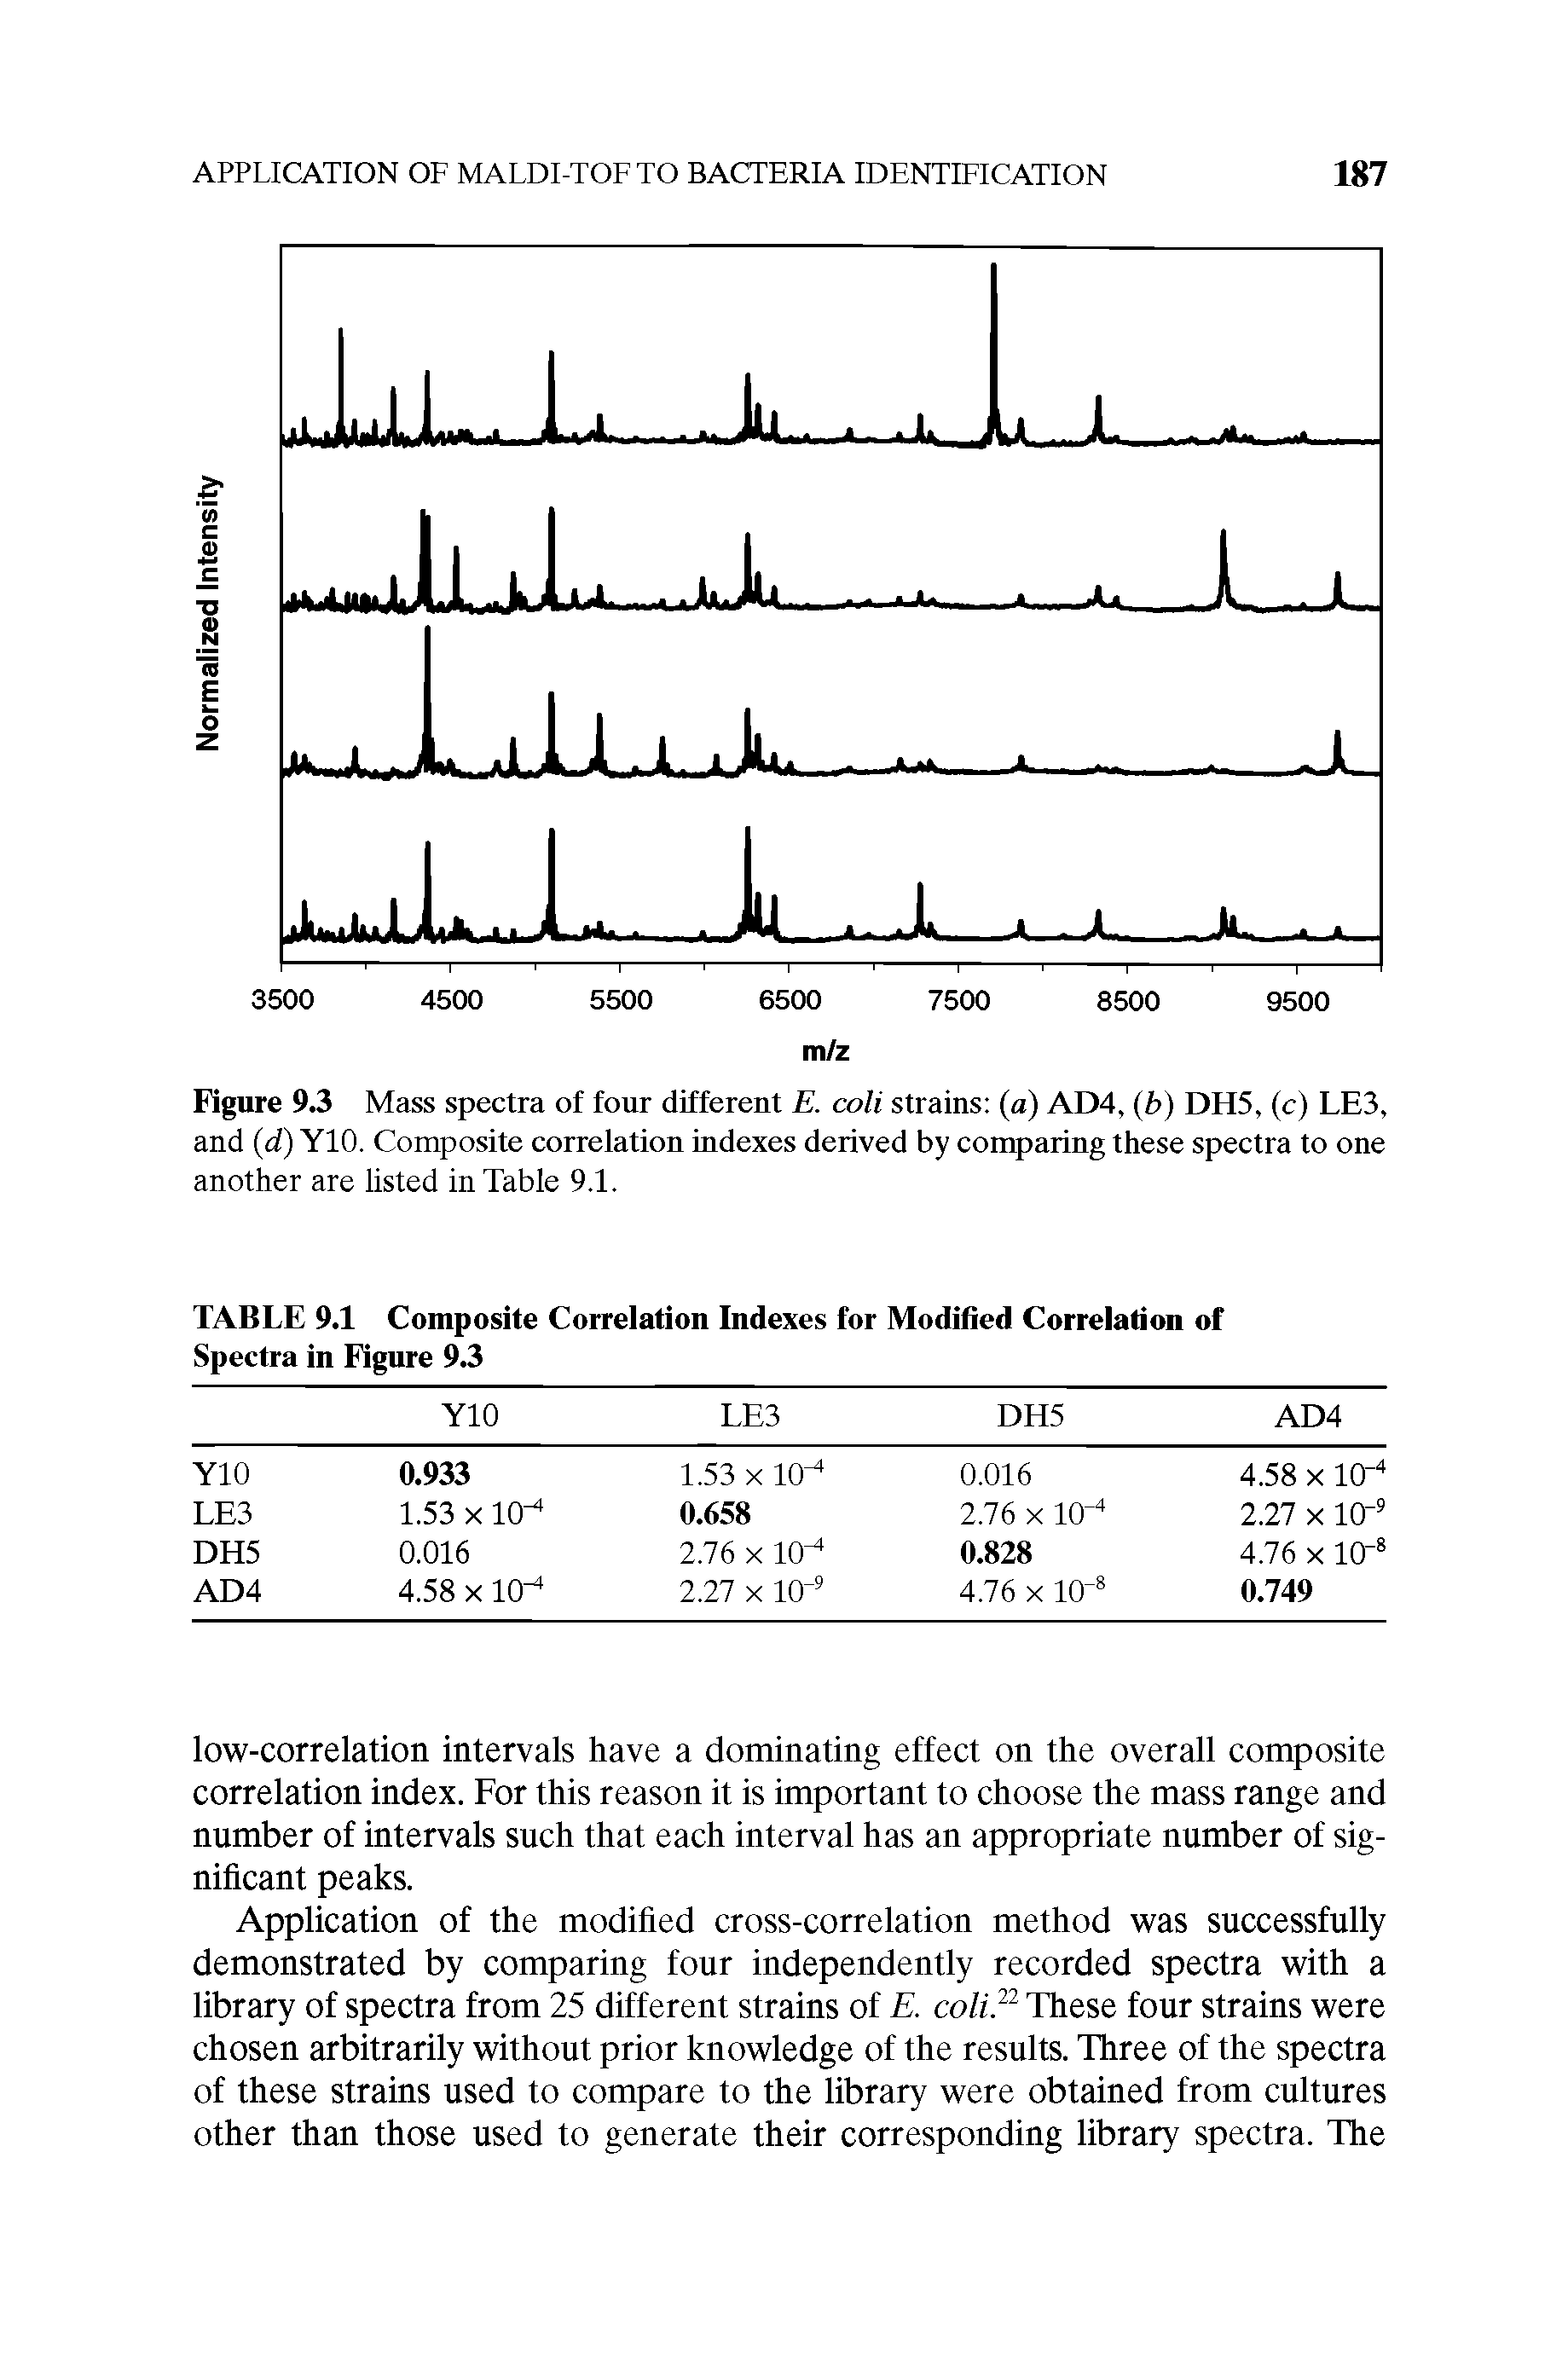 Figure 9.3 Mass spectra of four different E. coli strains (a) AD4, (b) DH5, (c) LE3, and (d) Y10. Composite correlation indexes derived by comparing these spectra to one another are listed in Table 9.1.